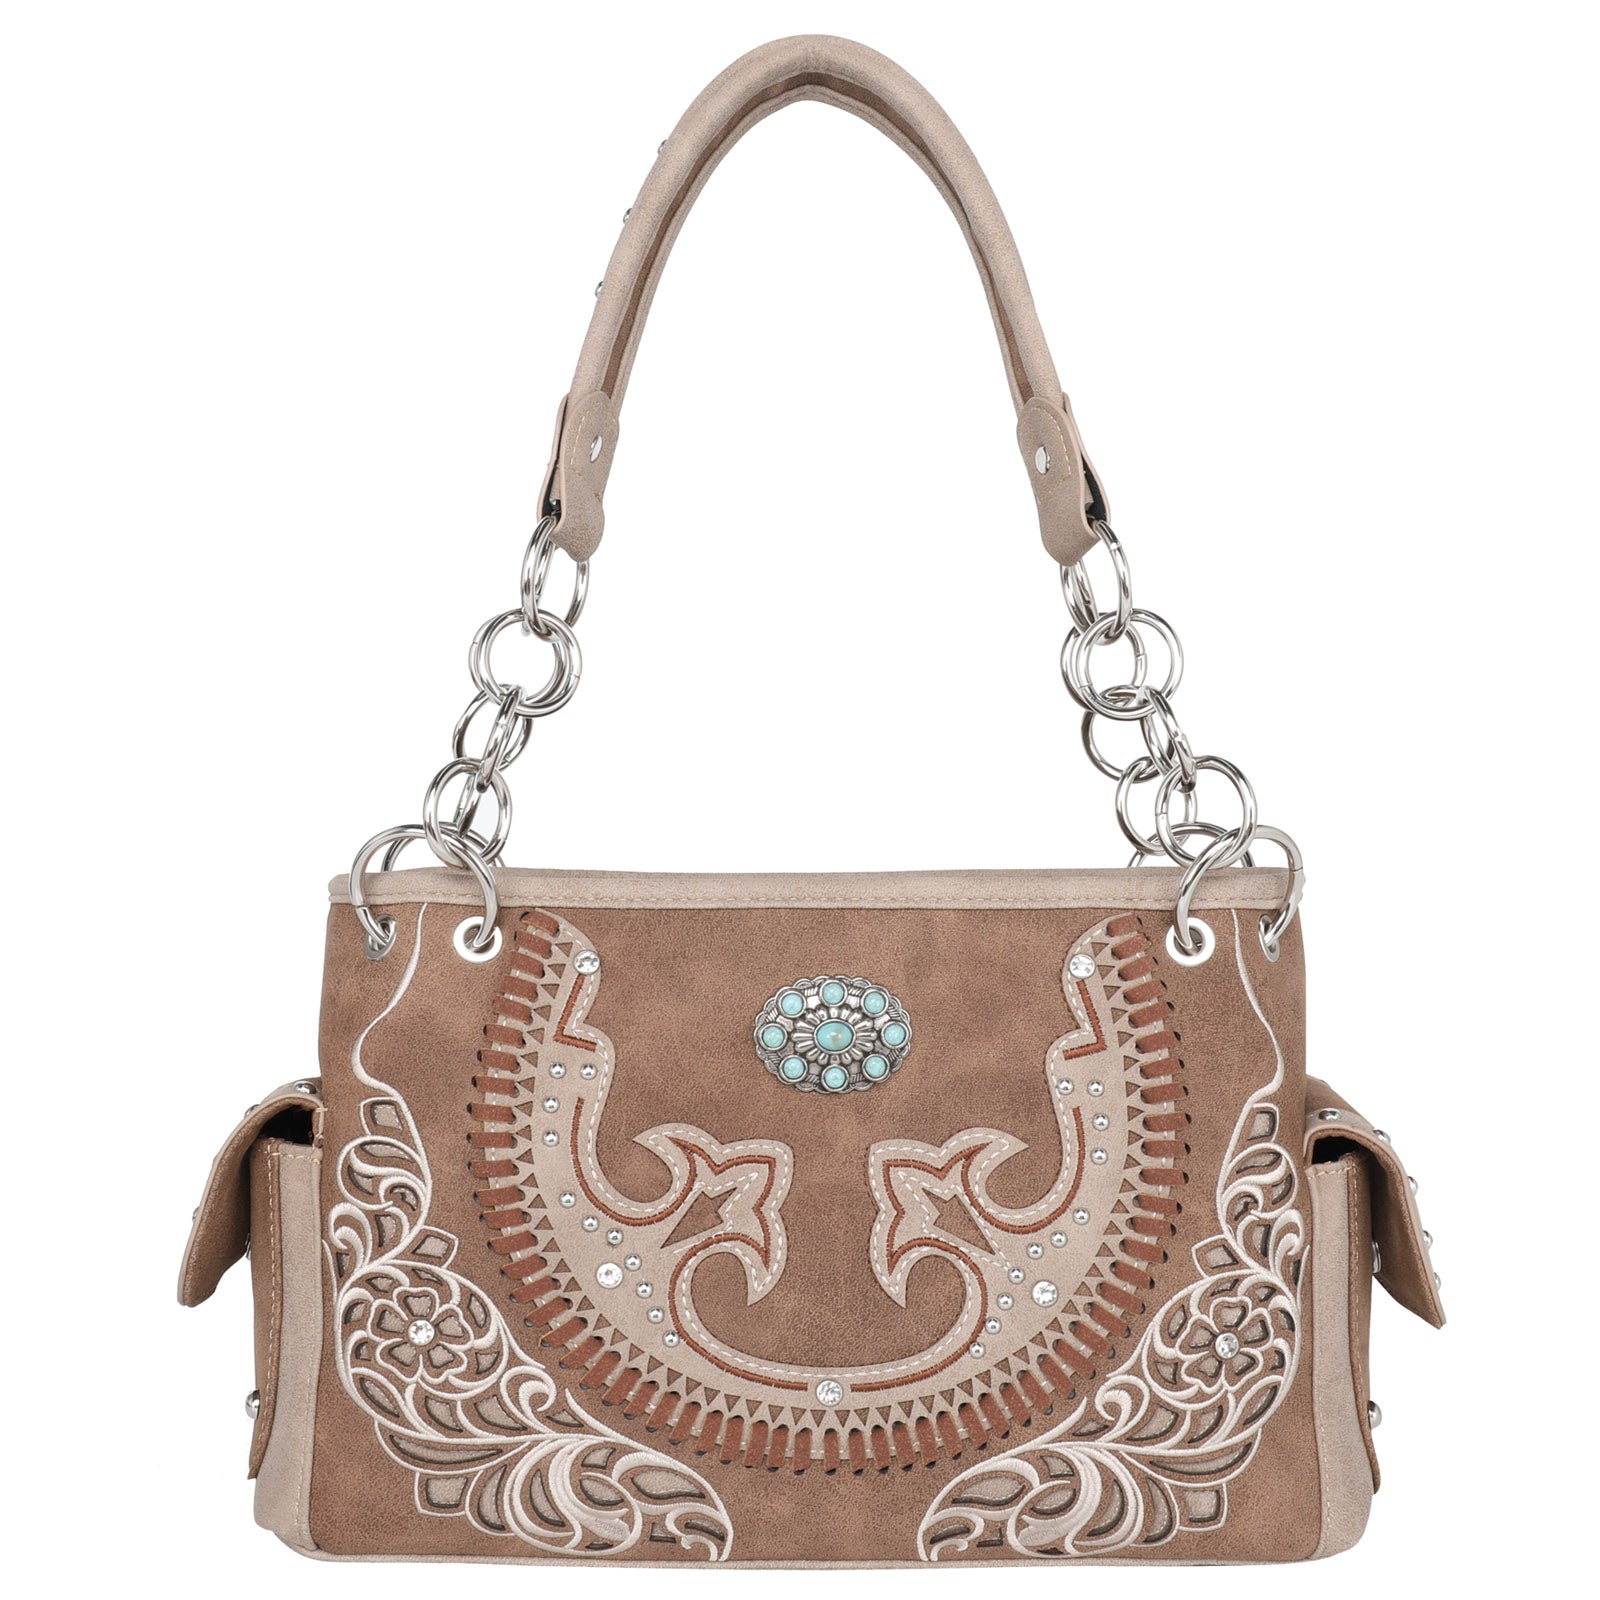 Montana West Cut-Out Collection Concealed Carry Satchel - Cowgirl Wear